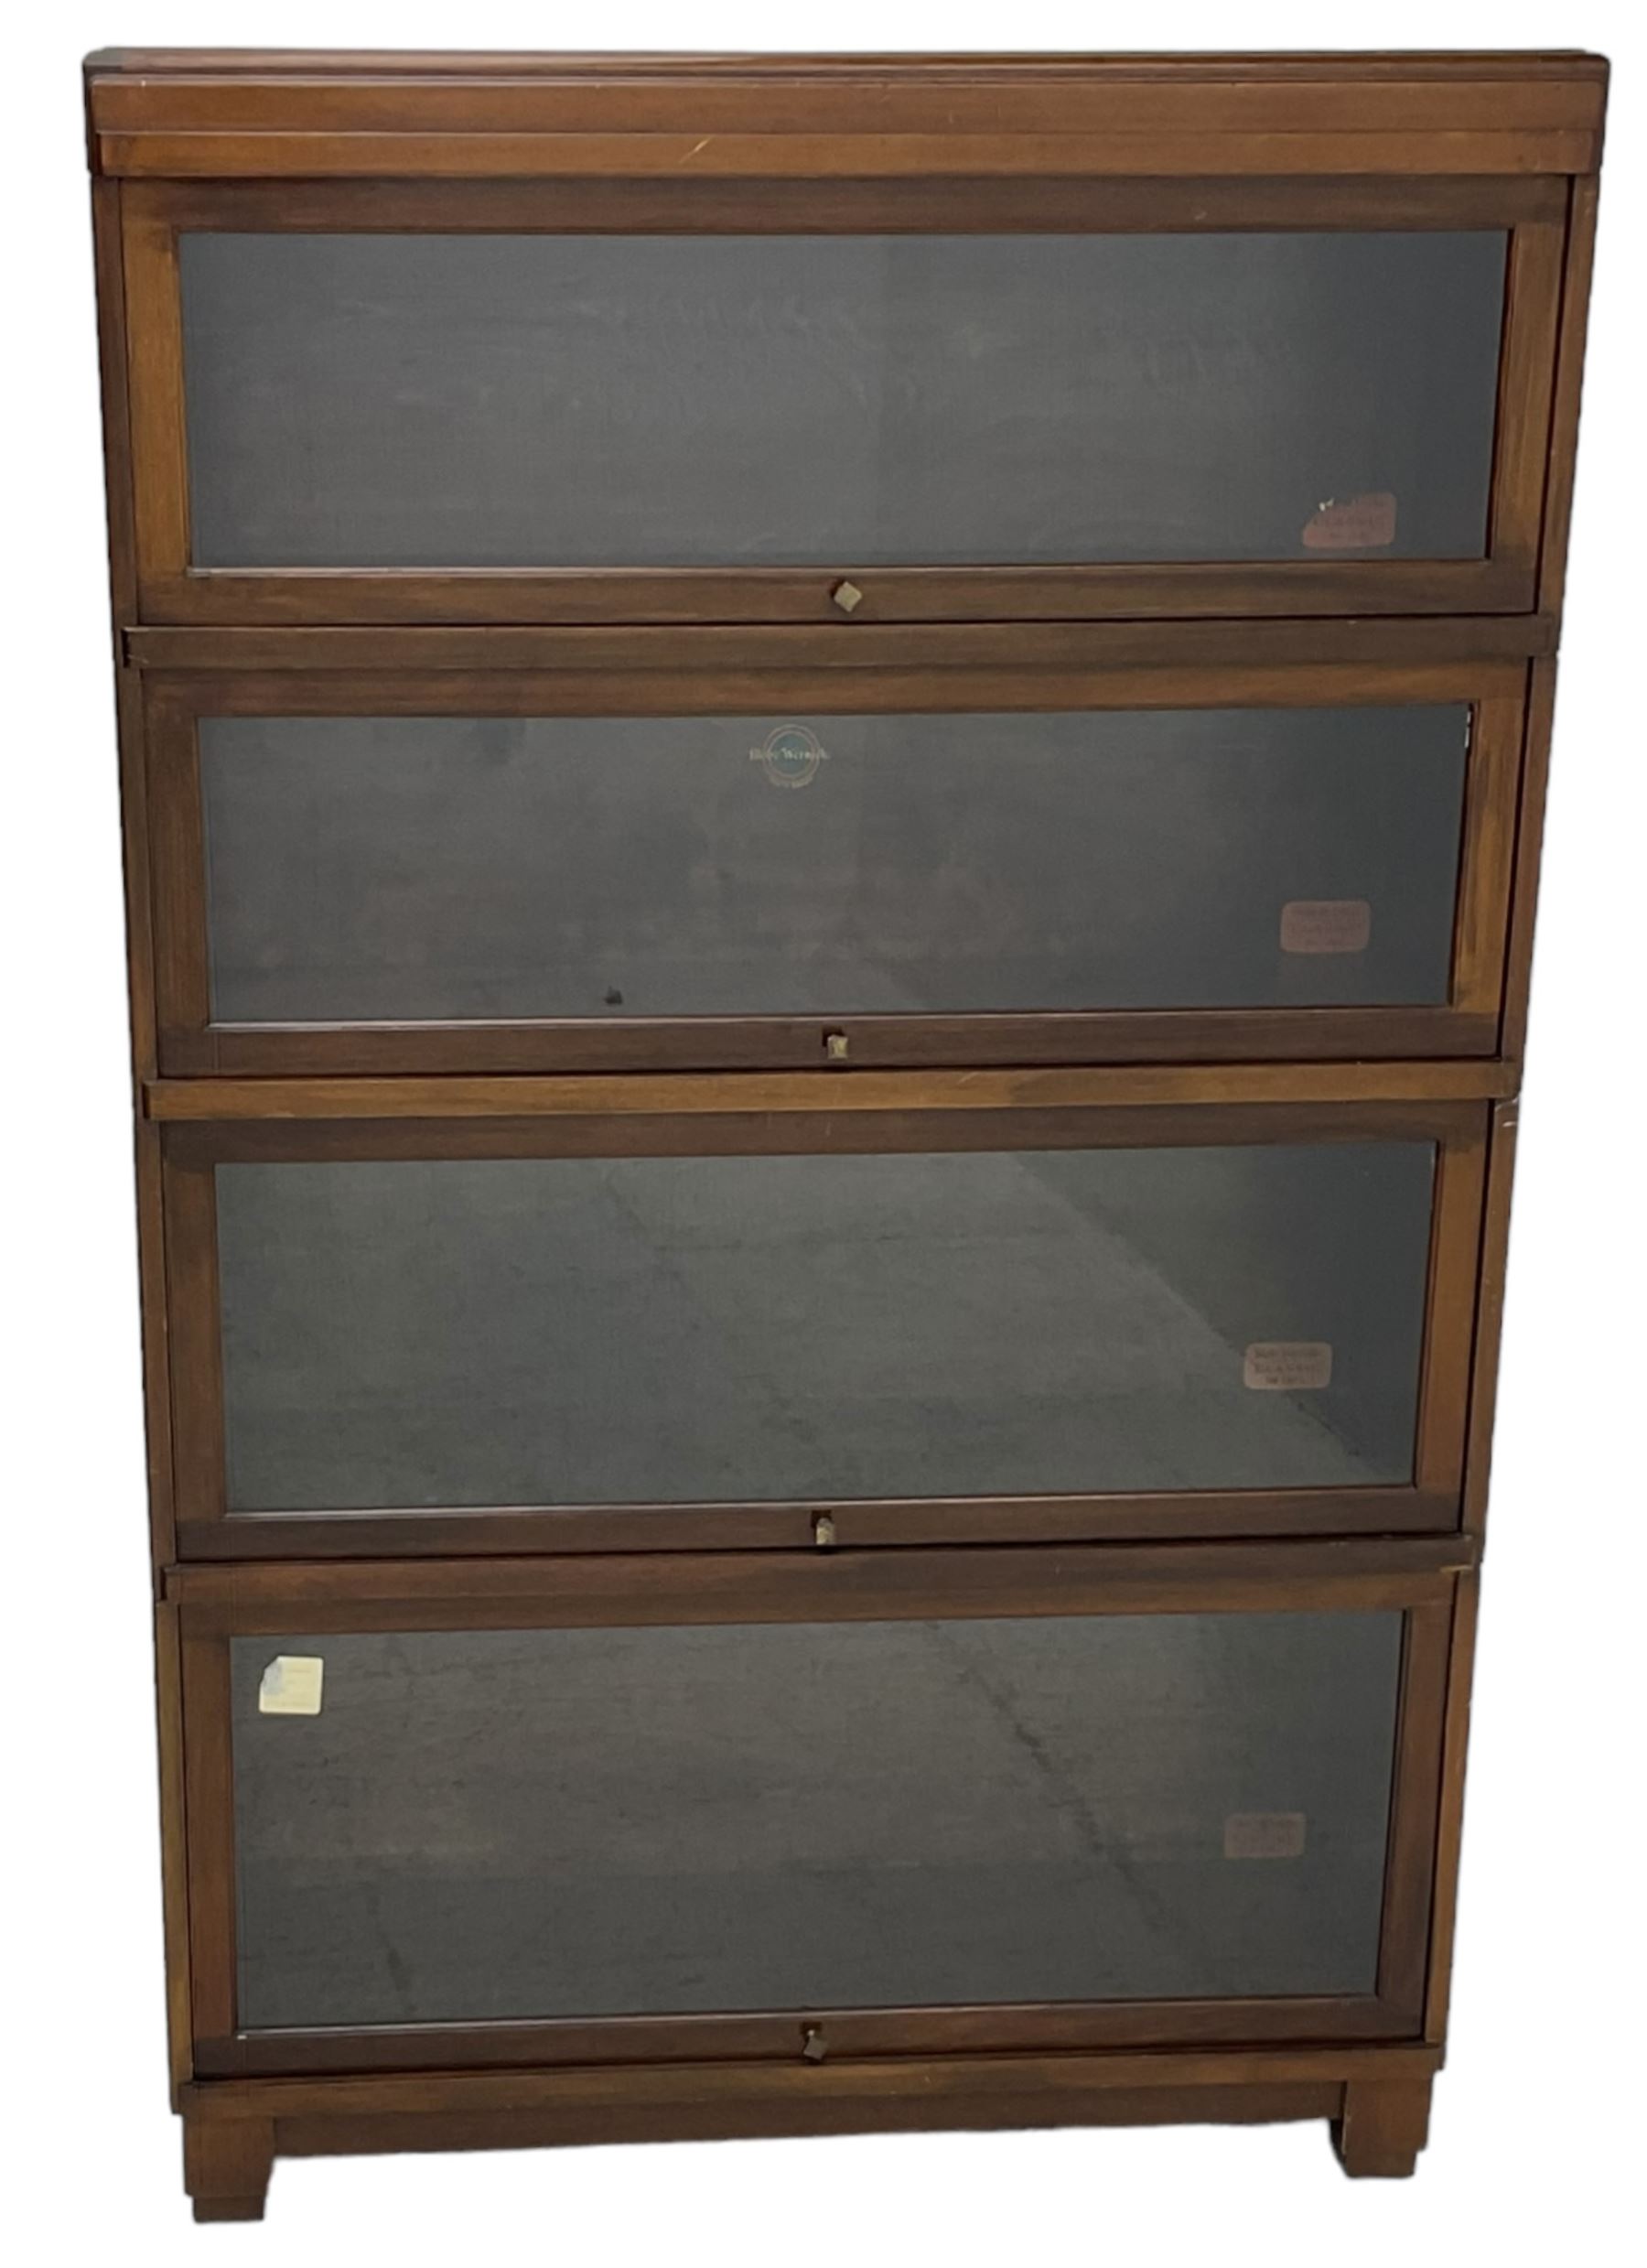 Globe Wernicke - early 20th century mahogany four-sectional stacking library bookcase - Image 7 of 8